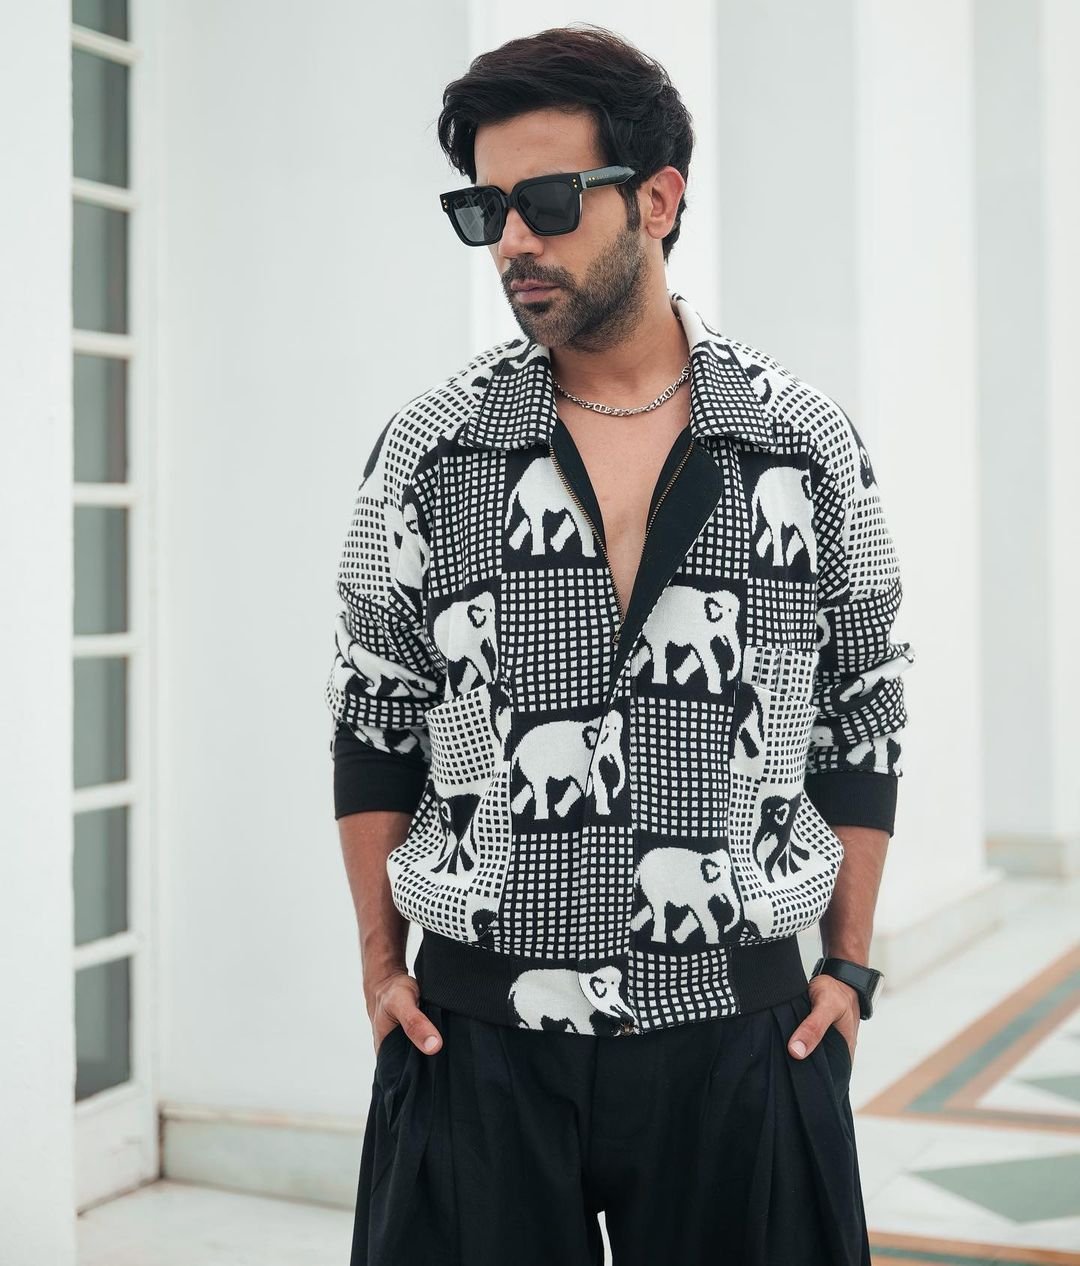 You are currently viewing The fashion evolution of Rajkummar Rao!